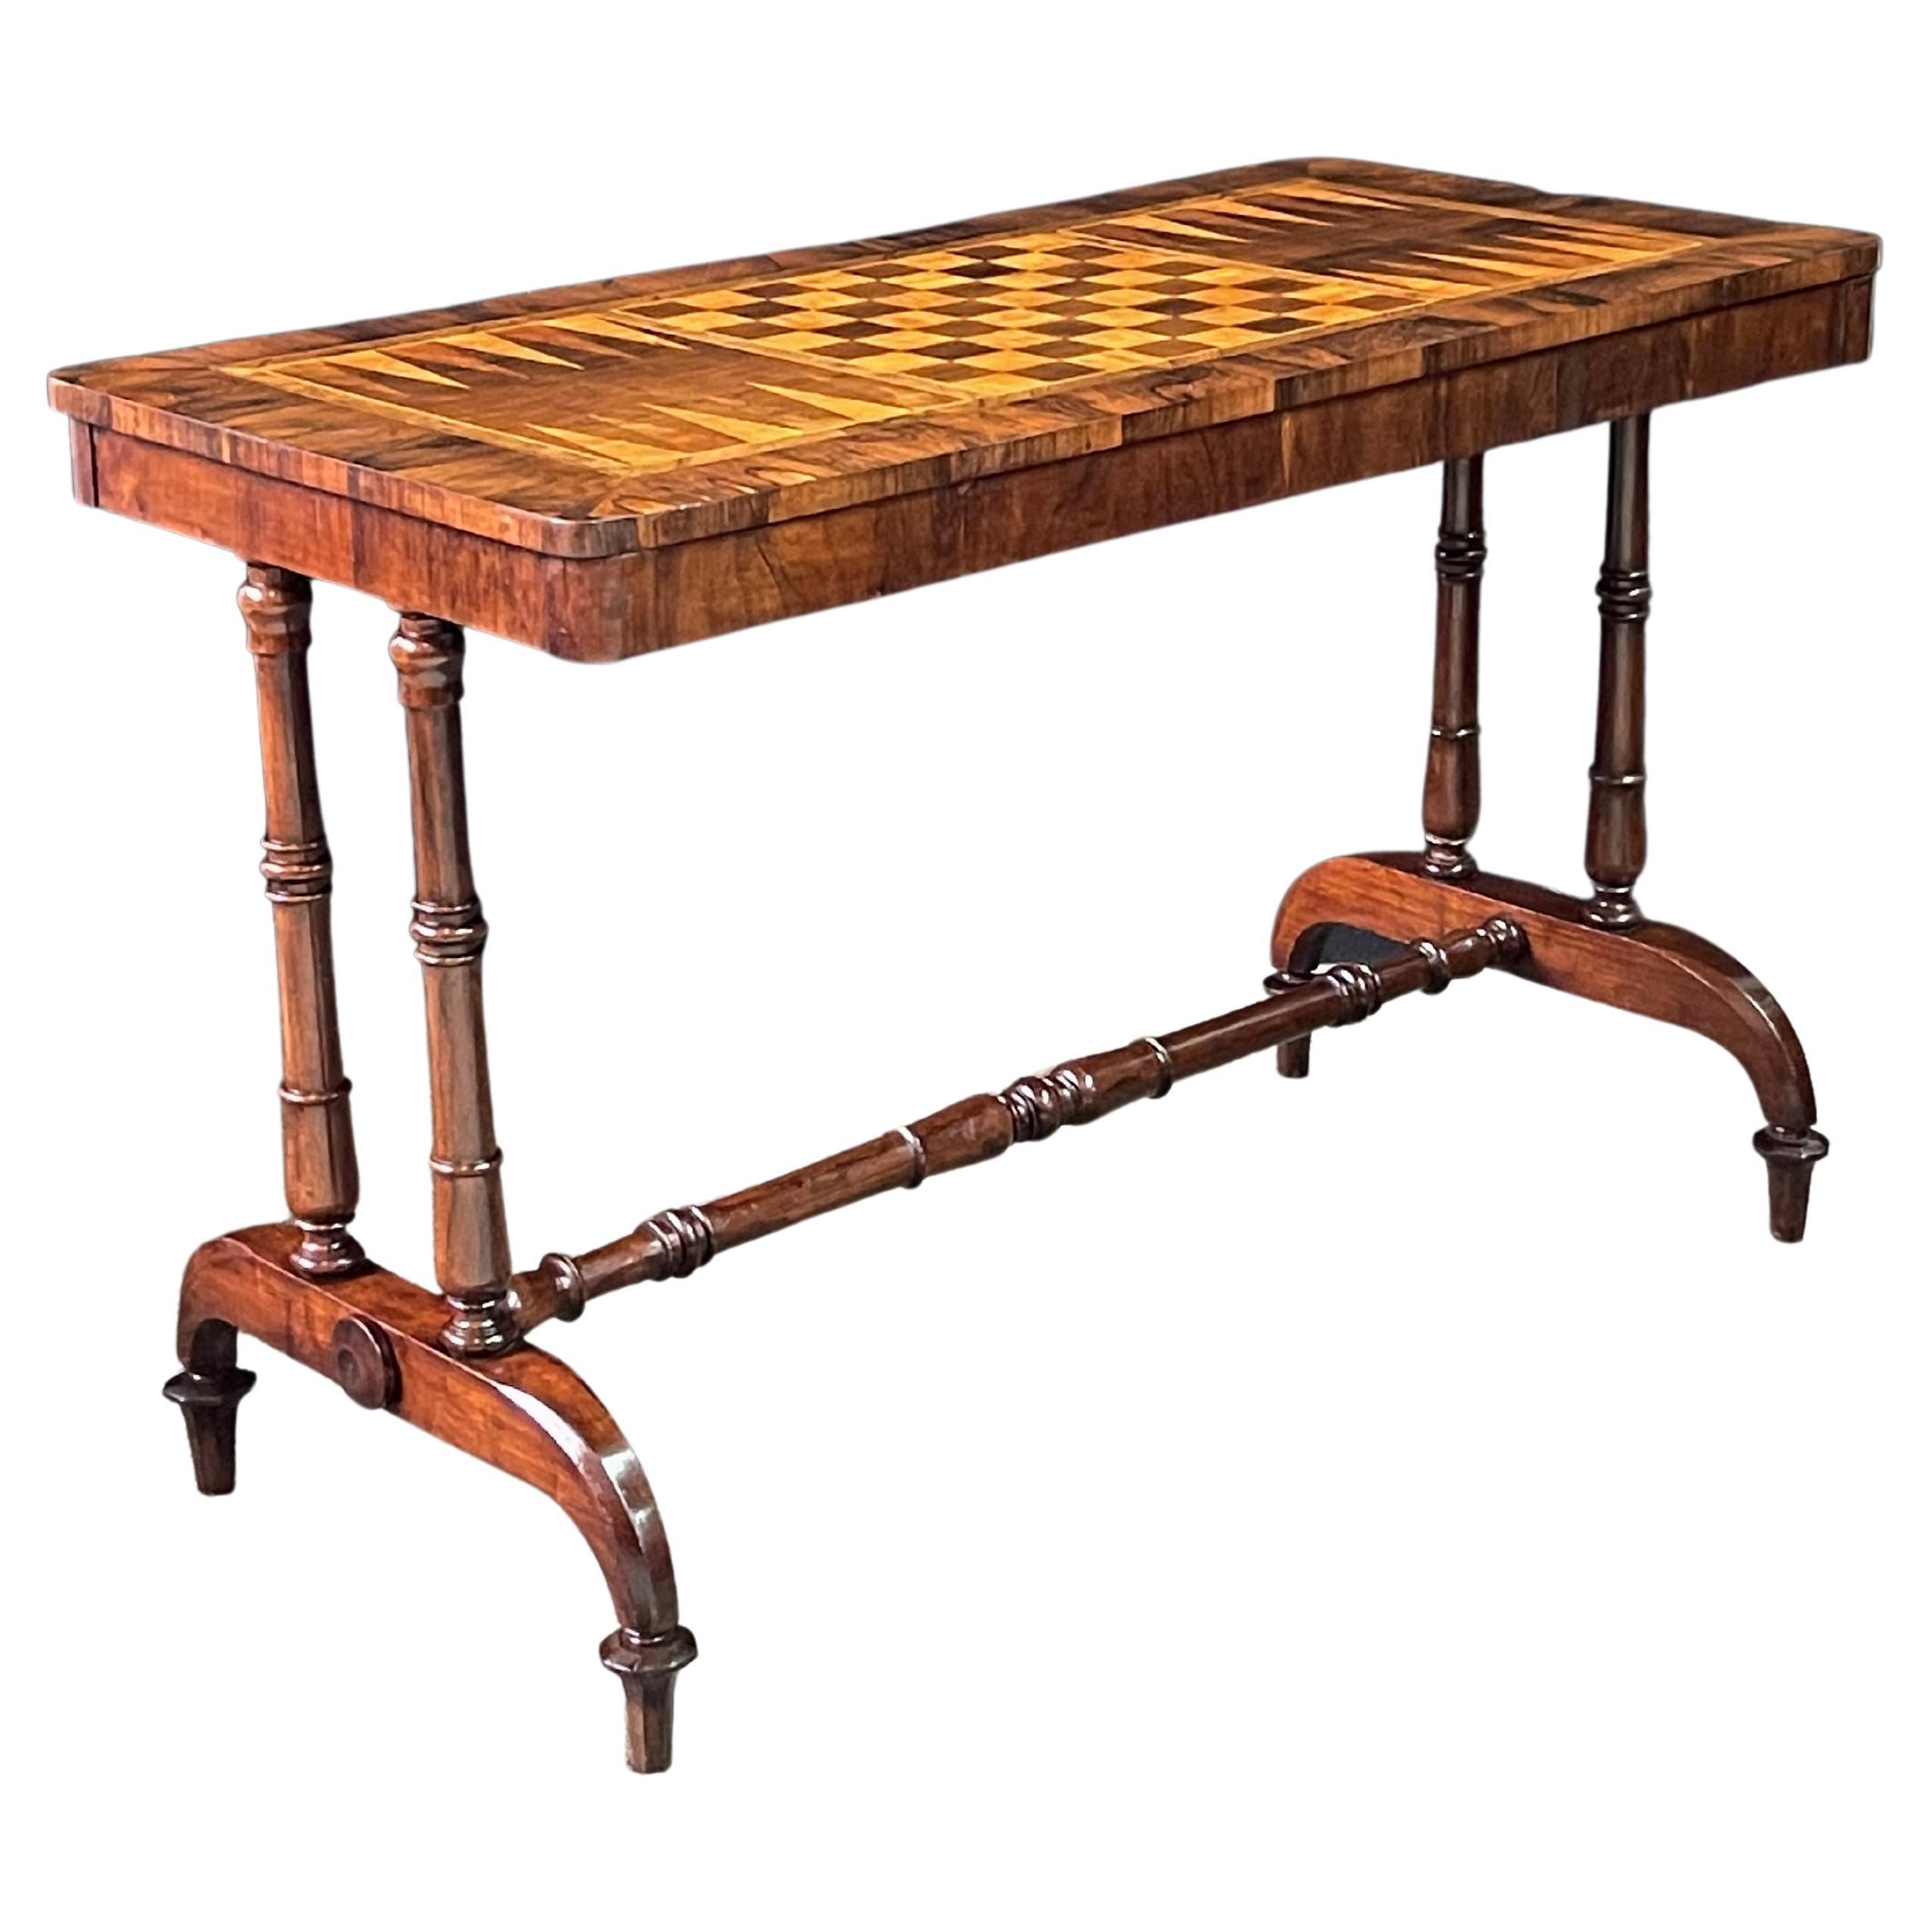 Stunning 19th century English game table in the Regency style with a rectangular top finely inlaid of exotic woods. Centered on the table is a chess/checkerboard that is flanked by backgammon boards. A beautifully-turned mahogany trestle base on